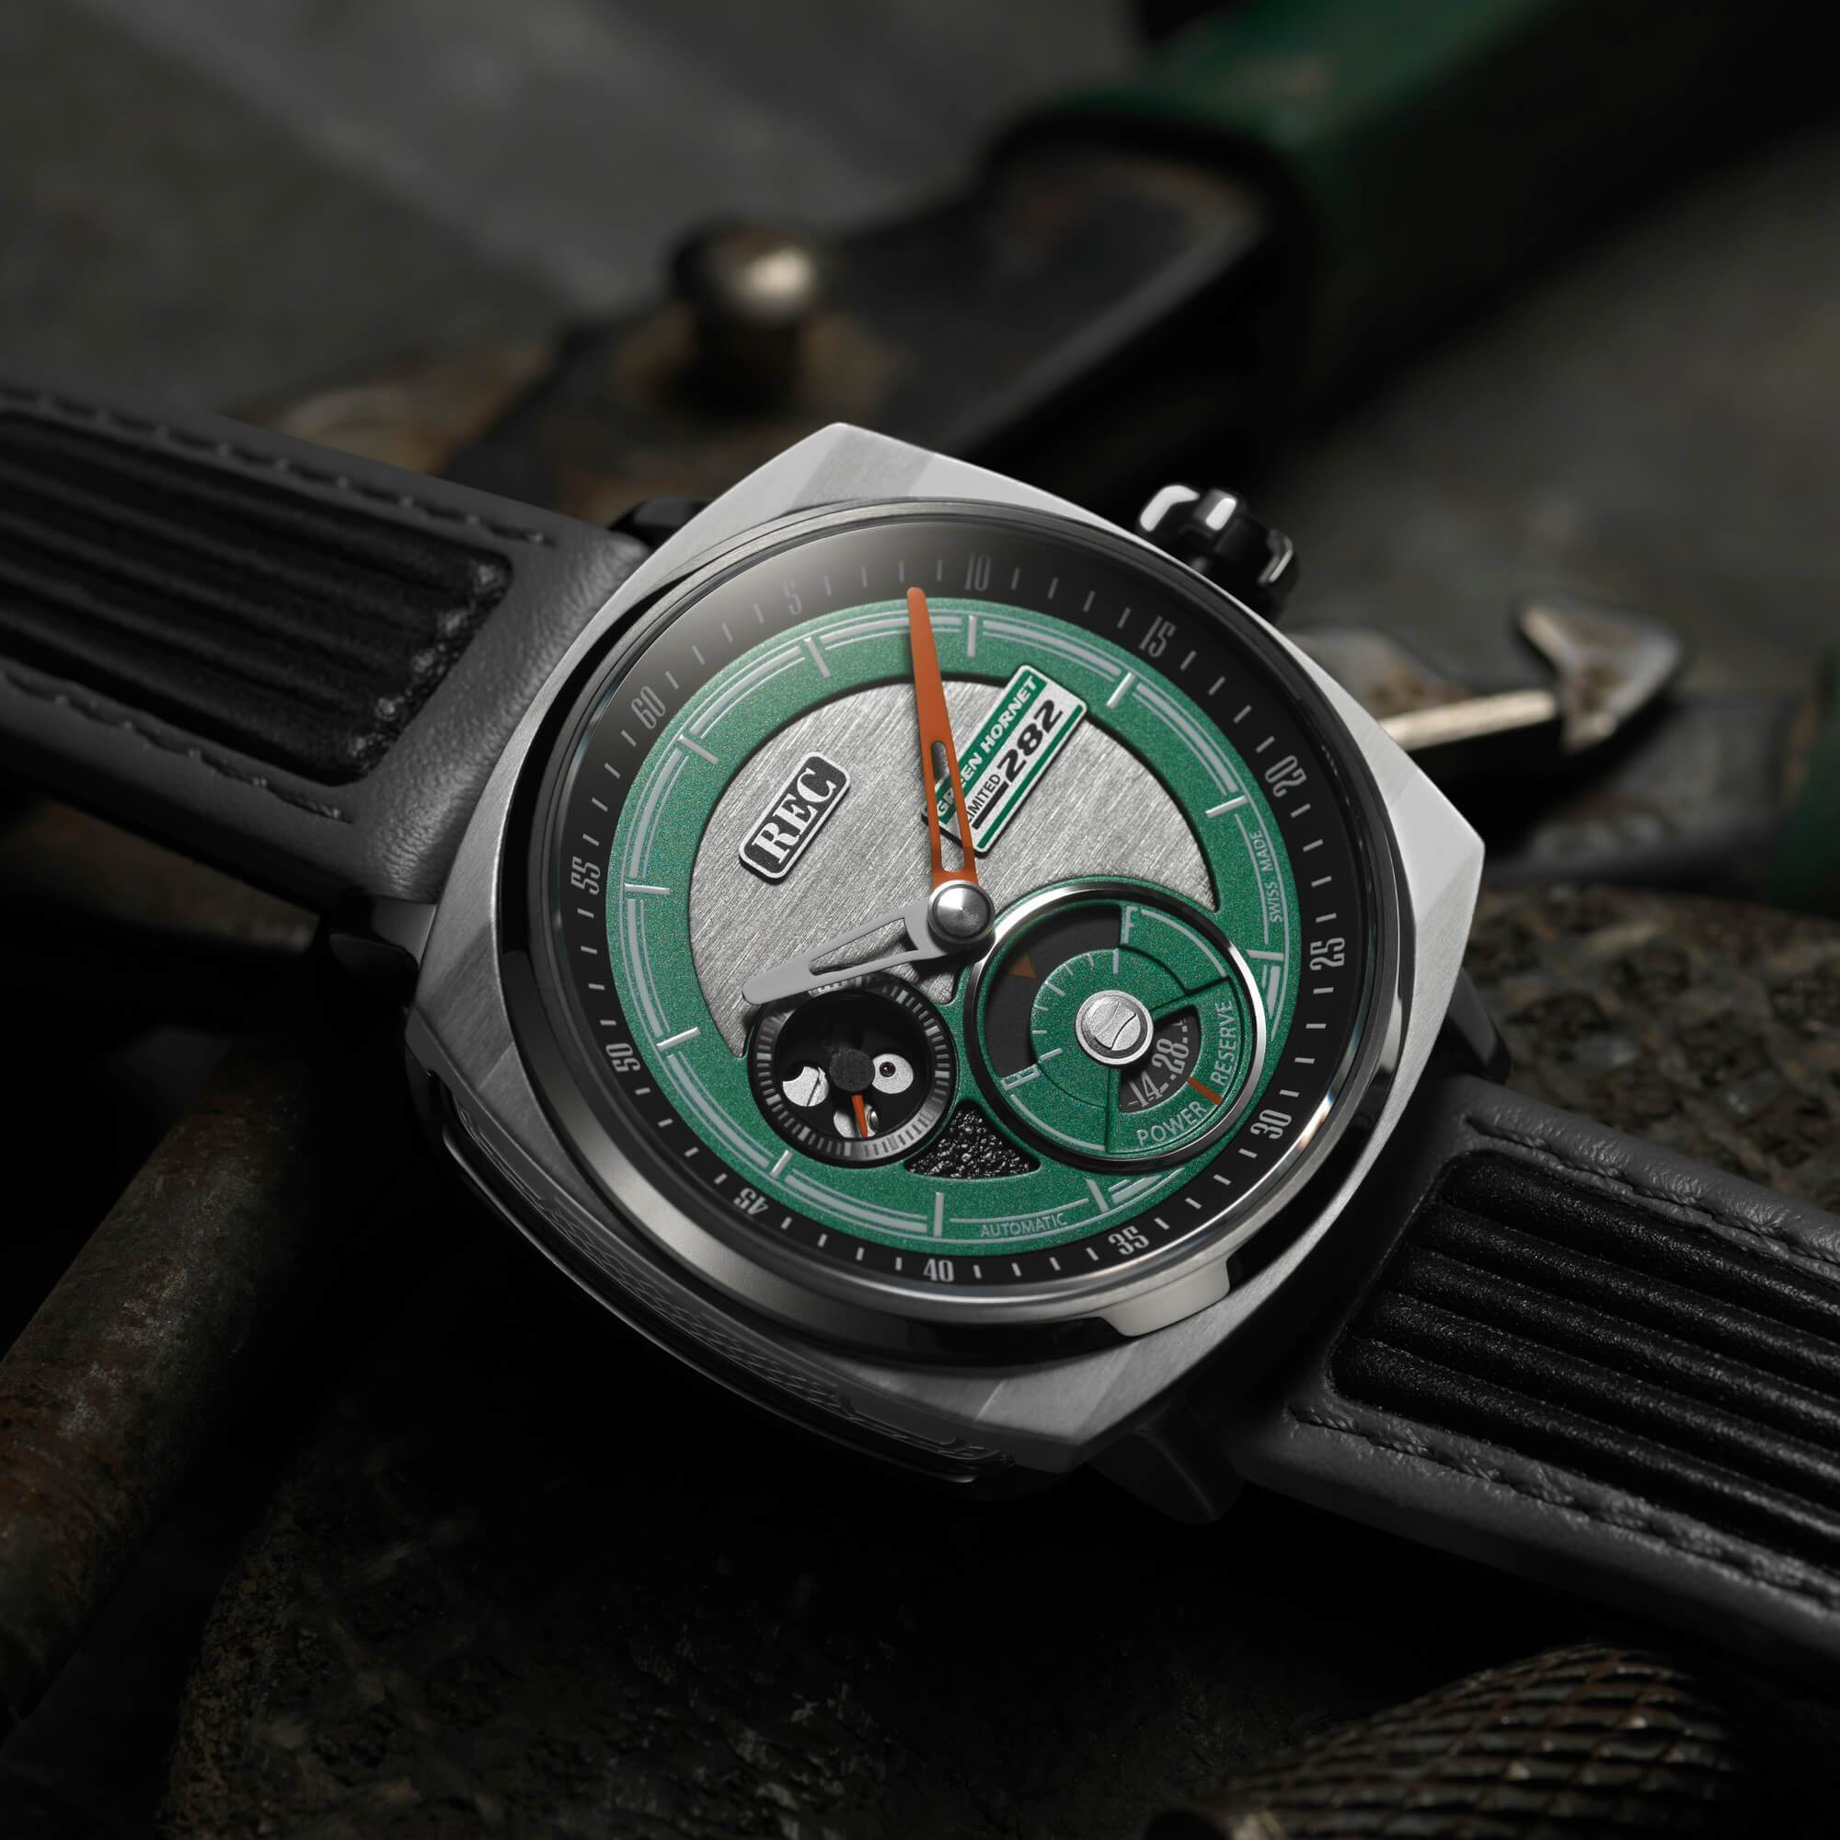 P-51 Green Hornet Limited Collection - REC Watches